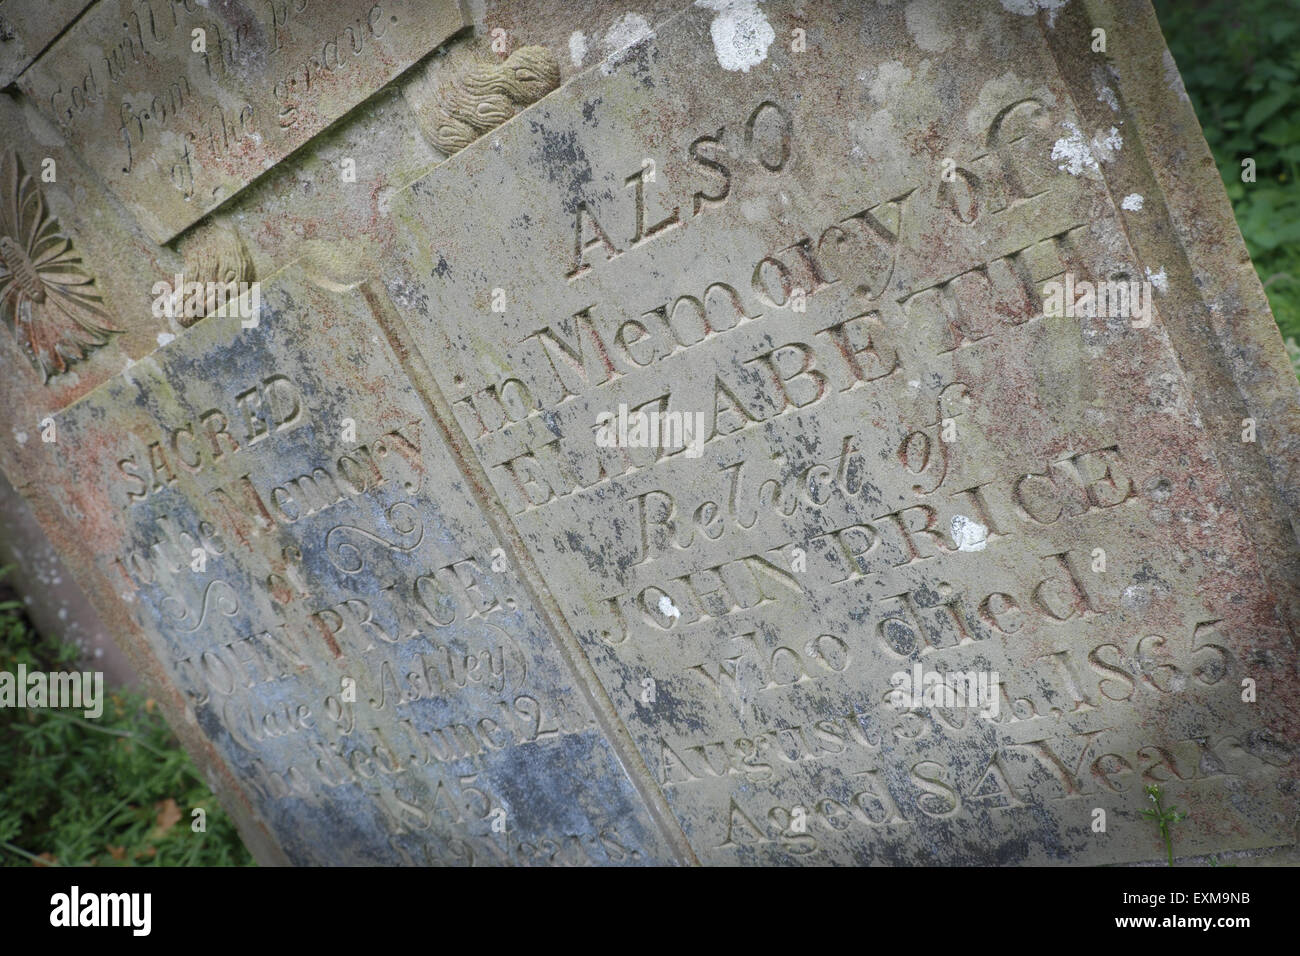 Victorian grave headstone dating from 1865 at a cemetery in Wales UK Stock Photo